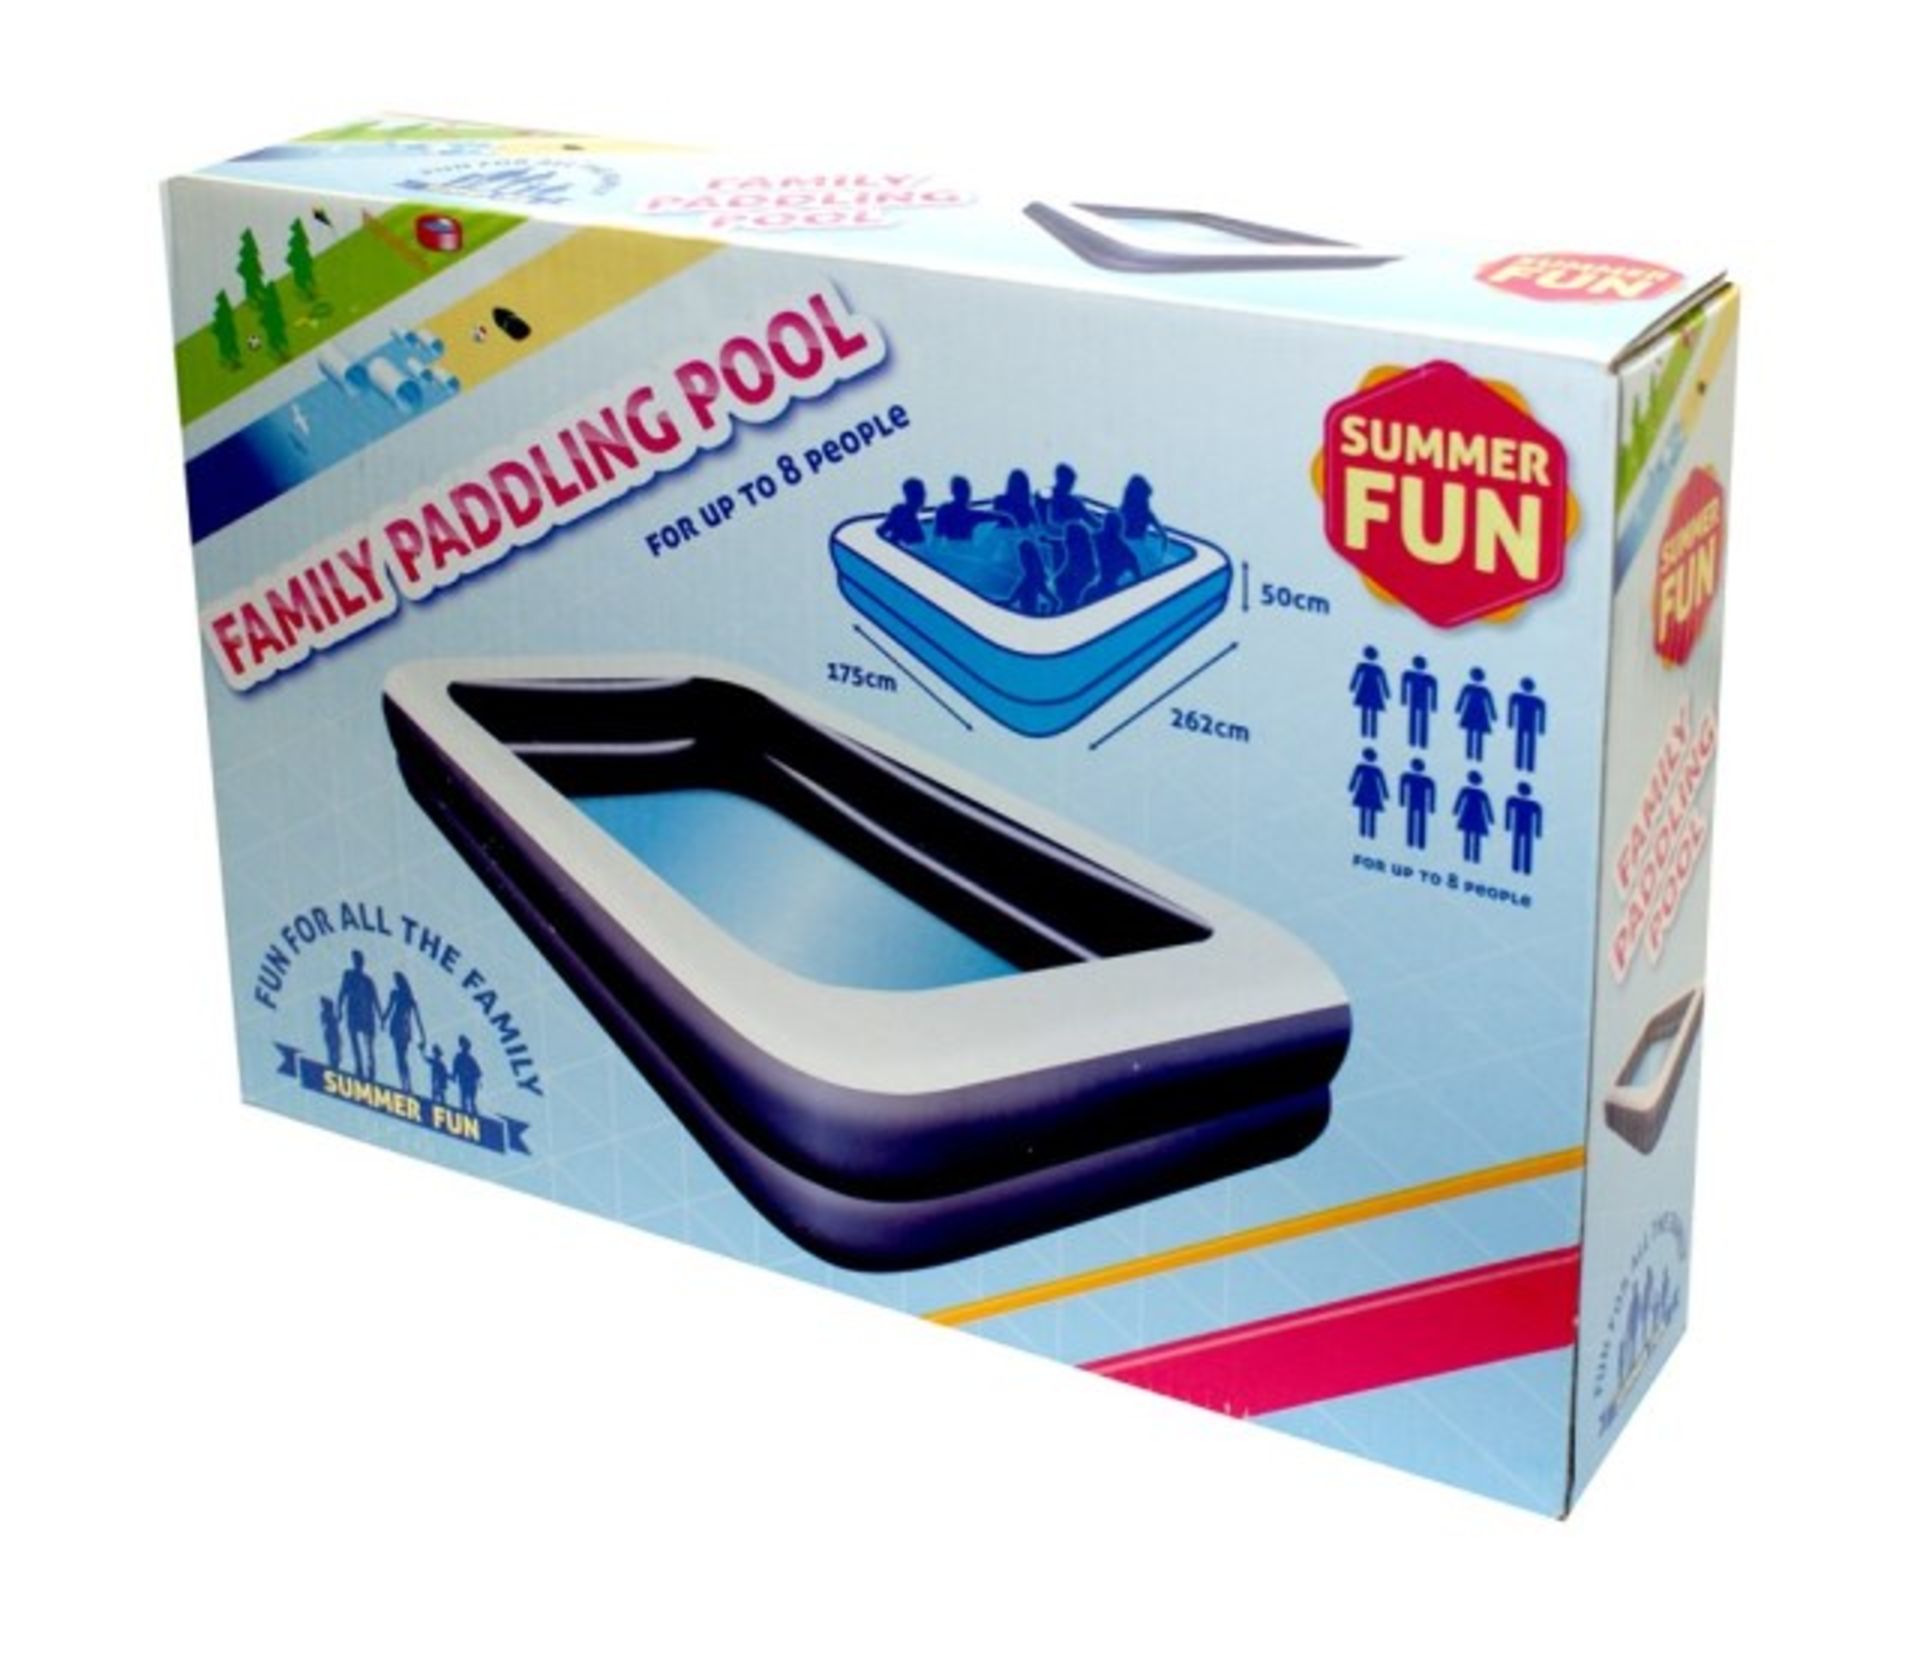 V *TRADE QTY* Brand New Family Paddling Pool 175x262x50cm X 45 YOUR BID PRICE TO BE MULTIPLIED BY - Image 2 of 2